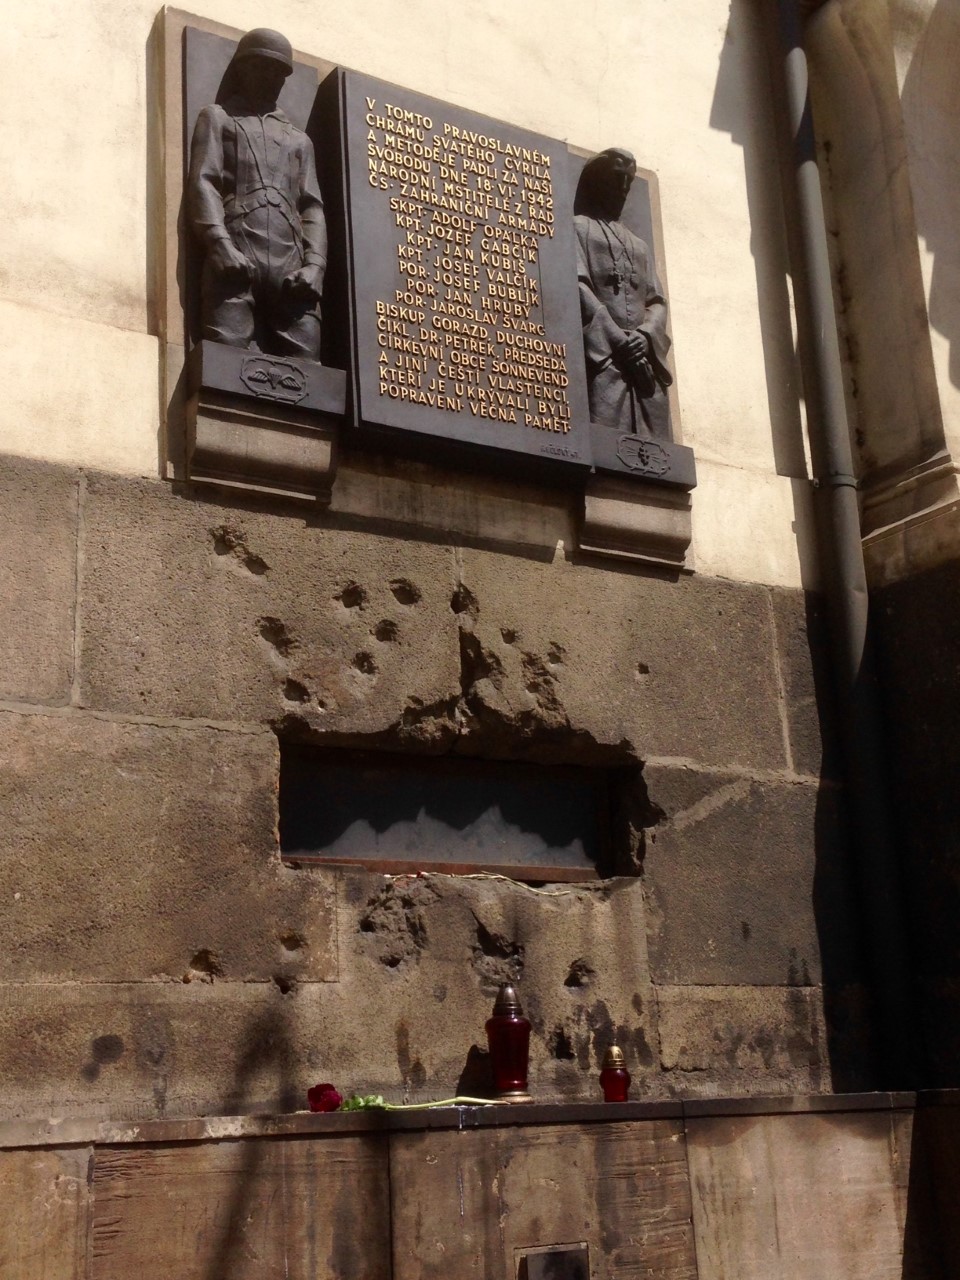 The wall of Sts. Cyril and Methodius church where the final shoot-out happened. Bullet holes frame the vent in the wall in which the fire department flooded the crypt. The plaque commemorates the battle and sacrifice. Ultimately, the priest, the bishop and the leaders of the church and their families were executed by the Nazis for harboring the Czech paratroopers. 